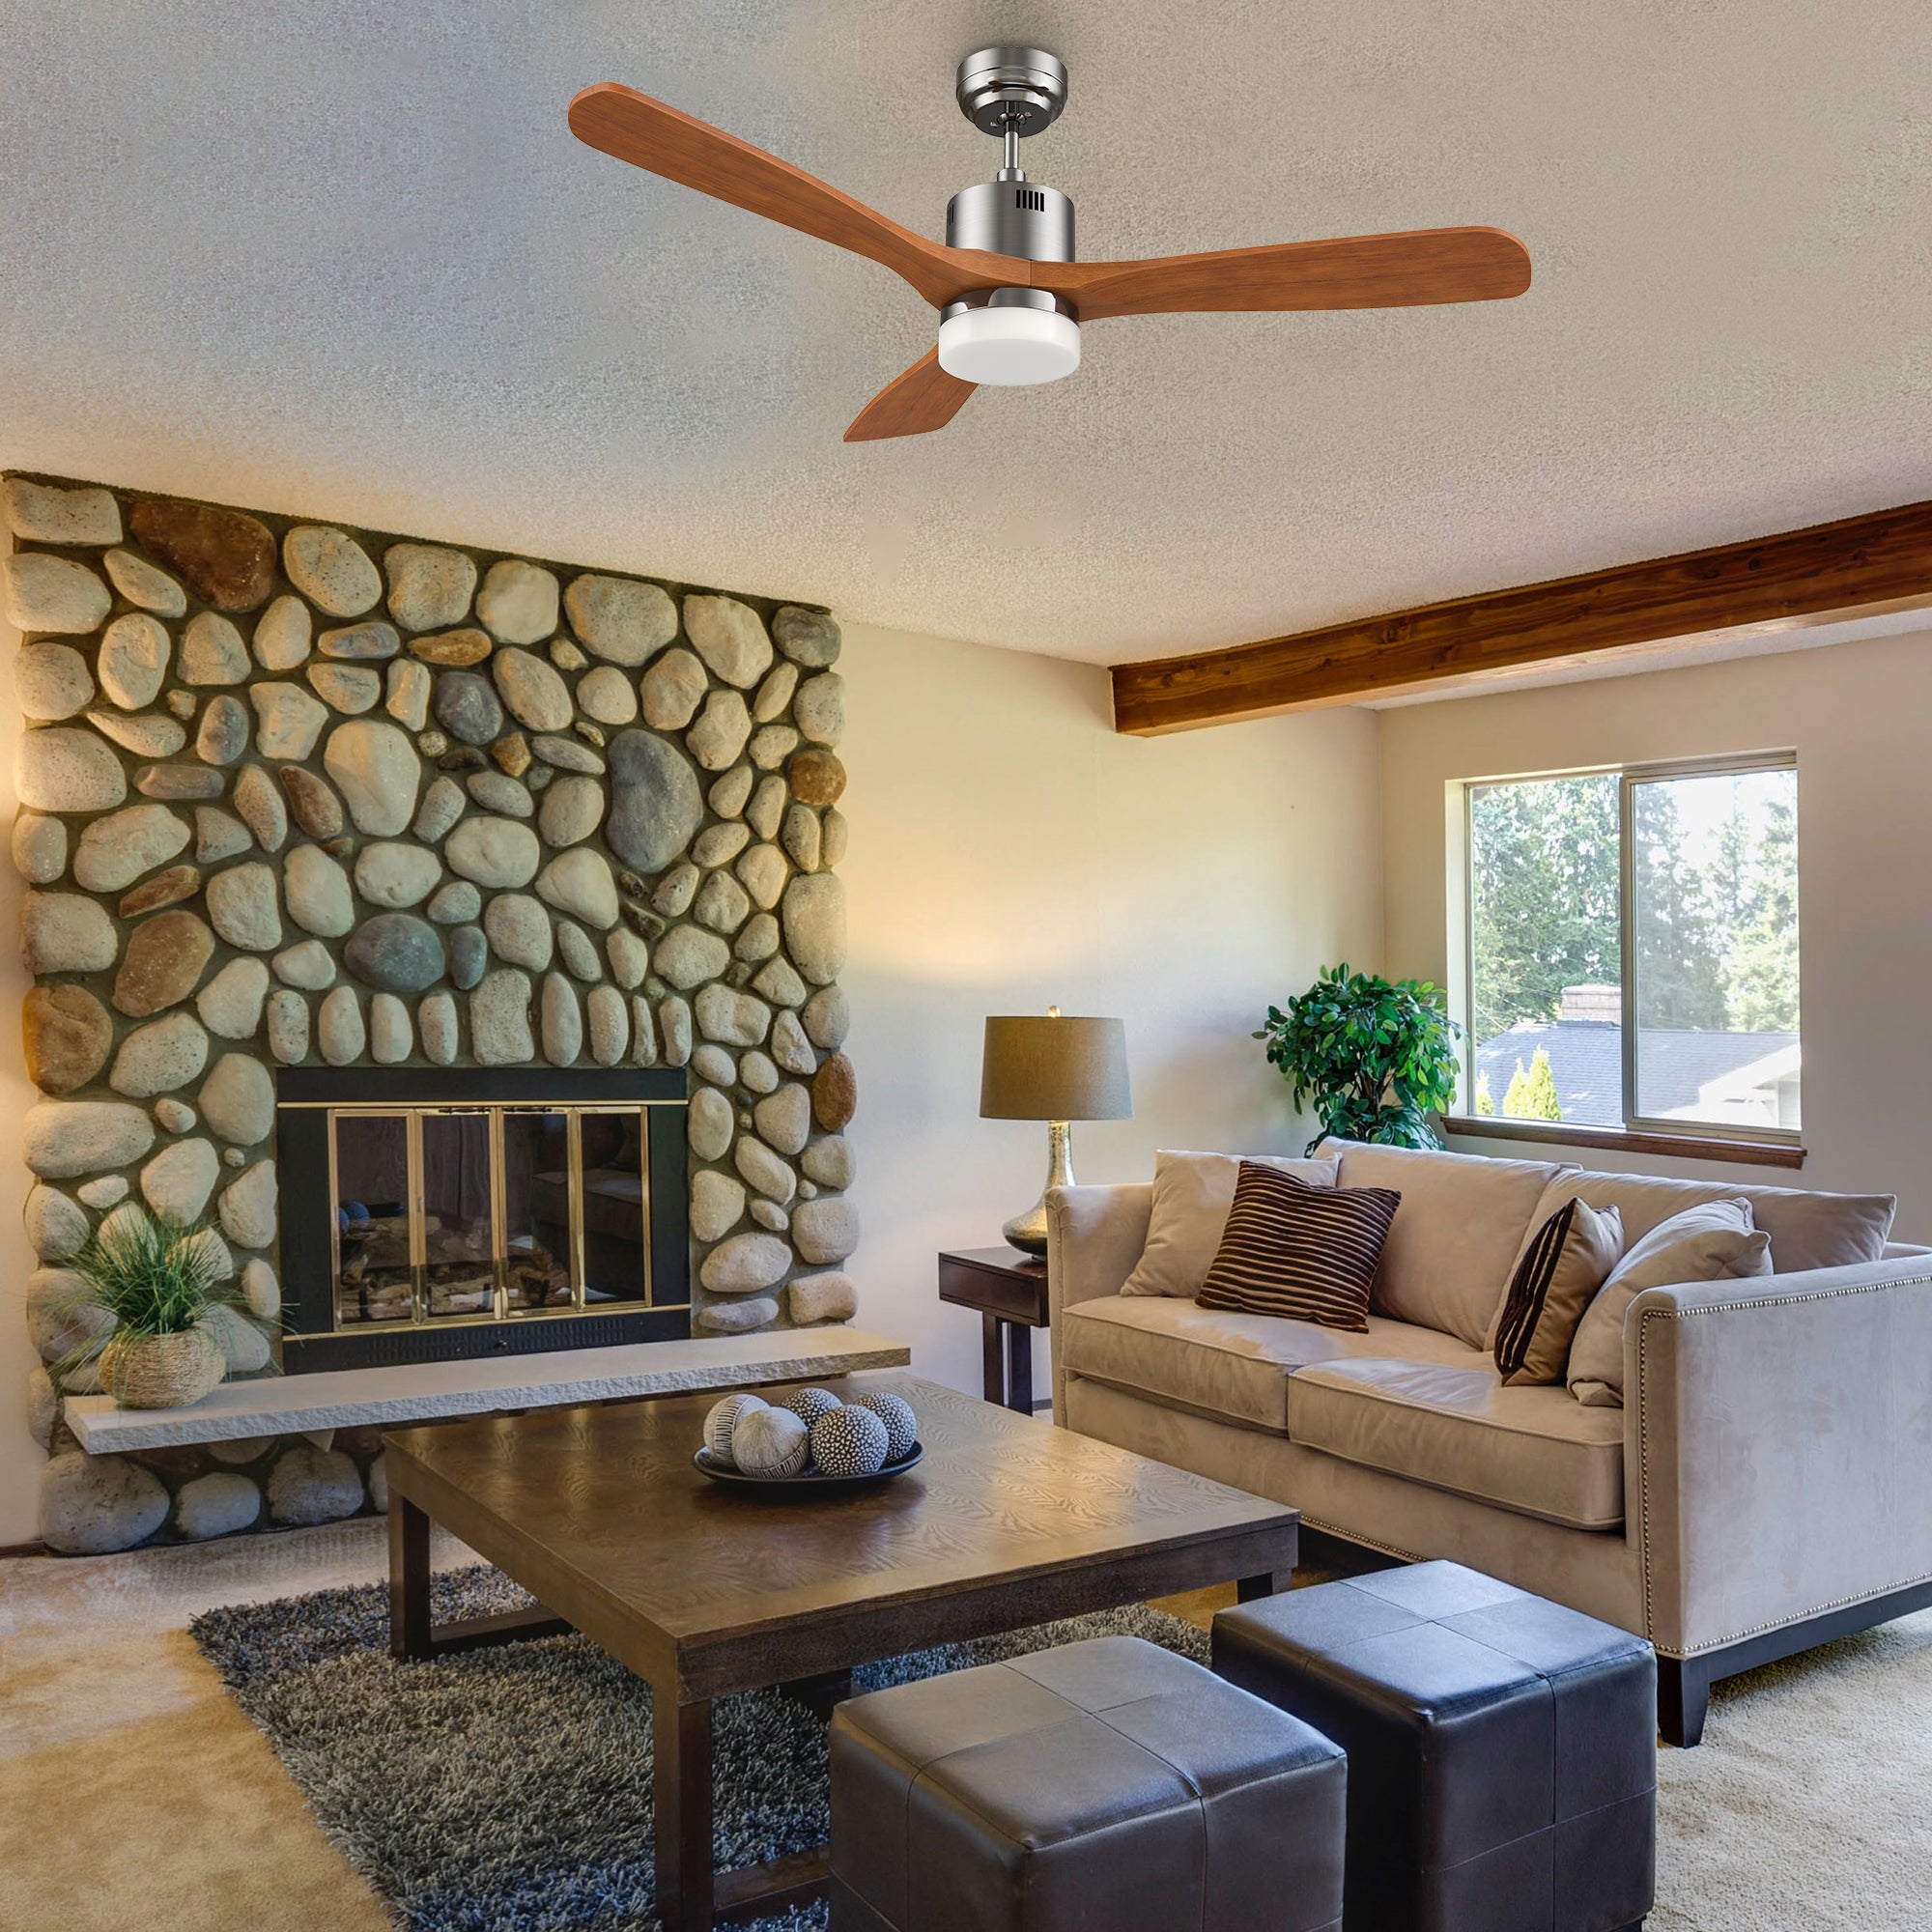 This Eton52&#39;&#39; smart ceiling fan keeps your space cool, bright, and stylish. It is a soft modern masterpiece perfect for your large indoor living spaces. This Wifi smart ceiling fan is a simplicity designing with Silver finish, use elegant Solid Wood blades and has an integrated 4000K LED daylight. The fan features Remote control, Wi-Fi apps, Siri Shortcut and Voice control technology (compatible with Amazon Alexa and Google Home Assistant ) to set fan preferences.